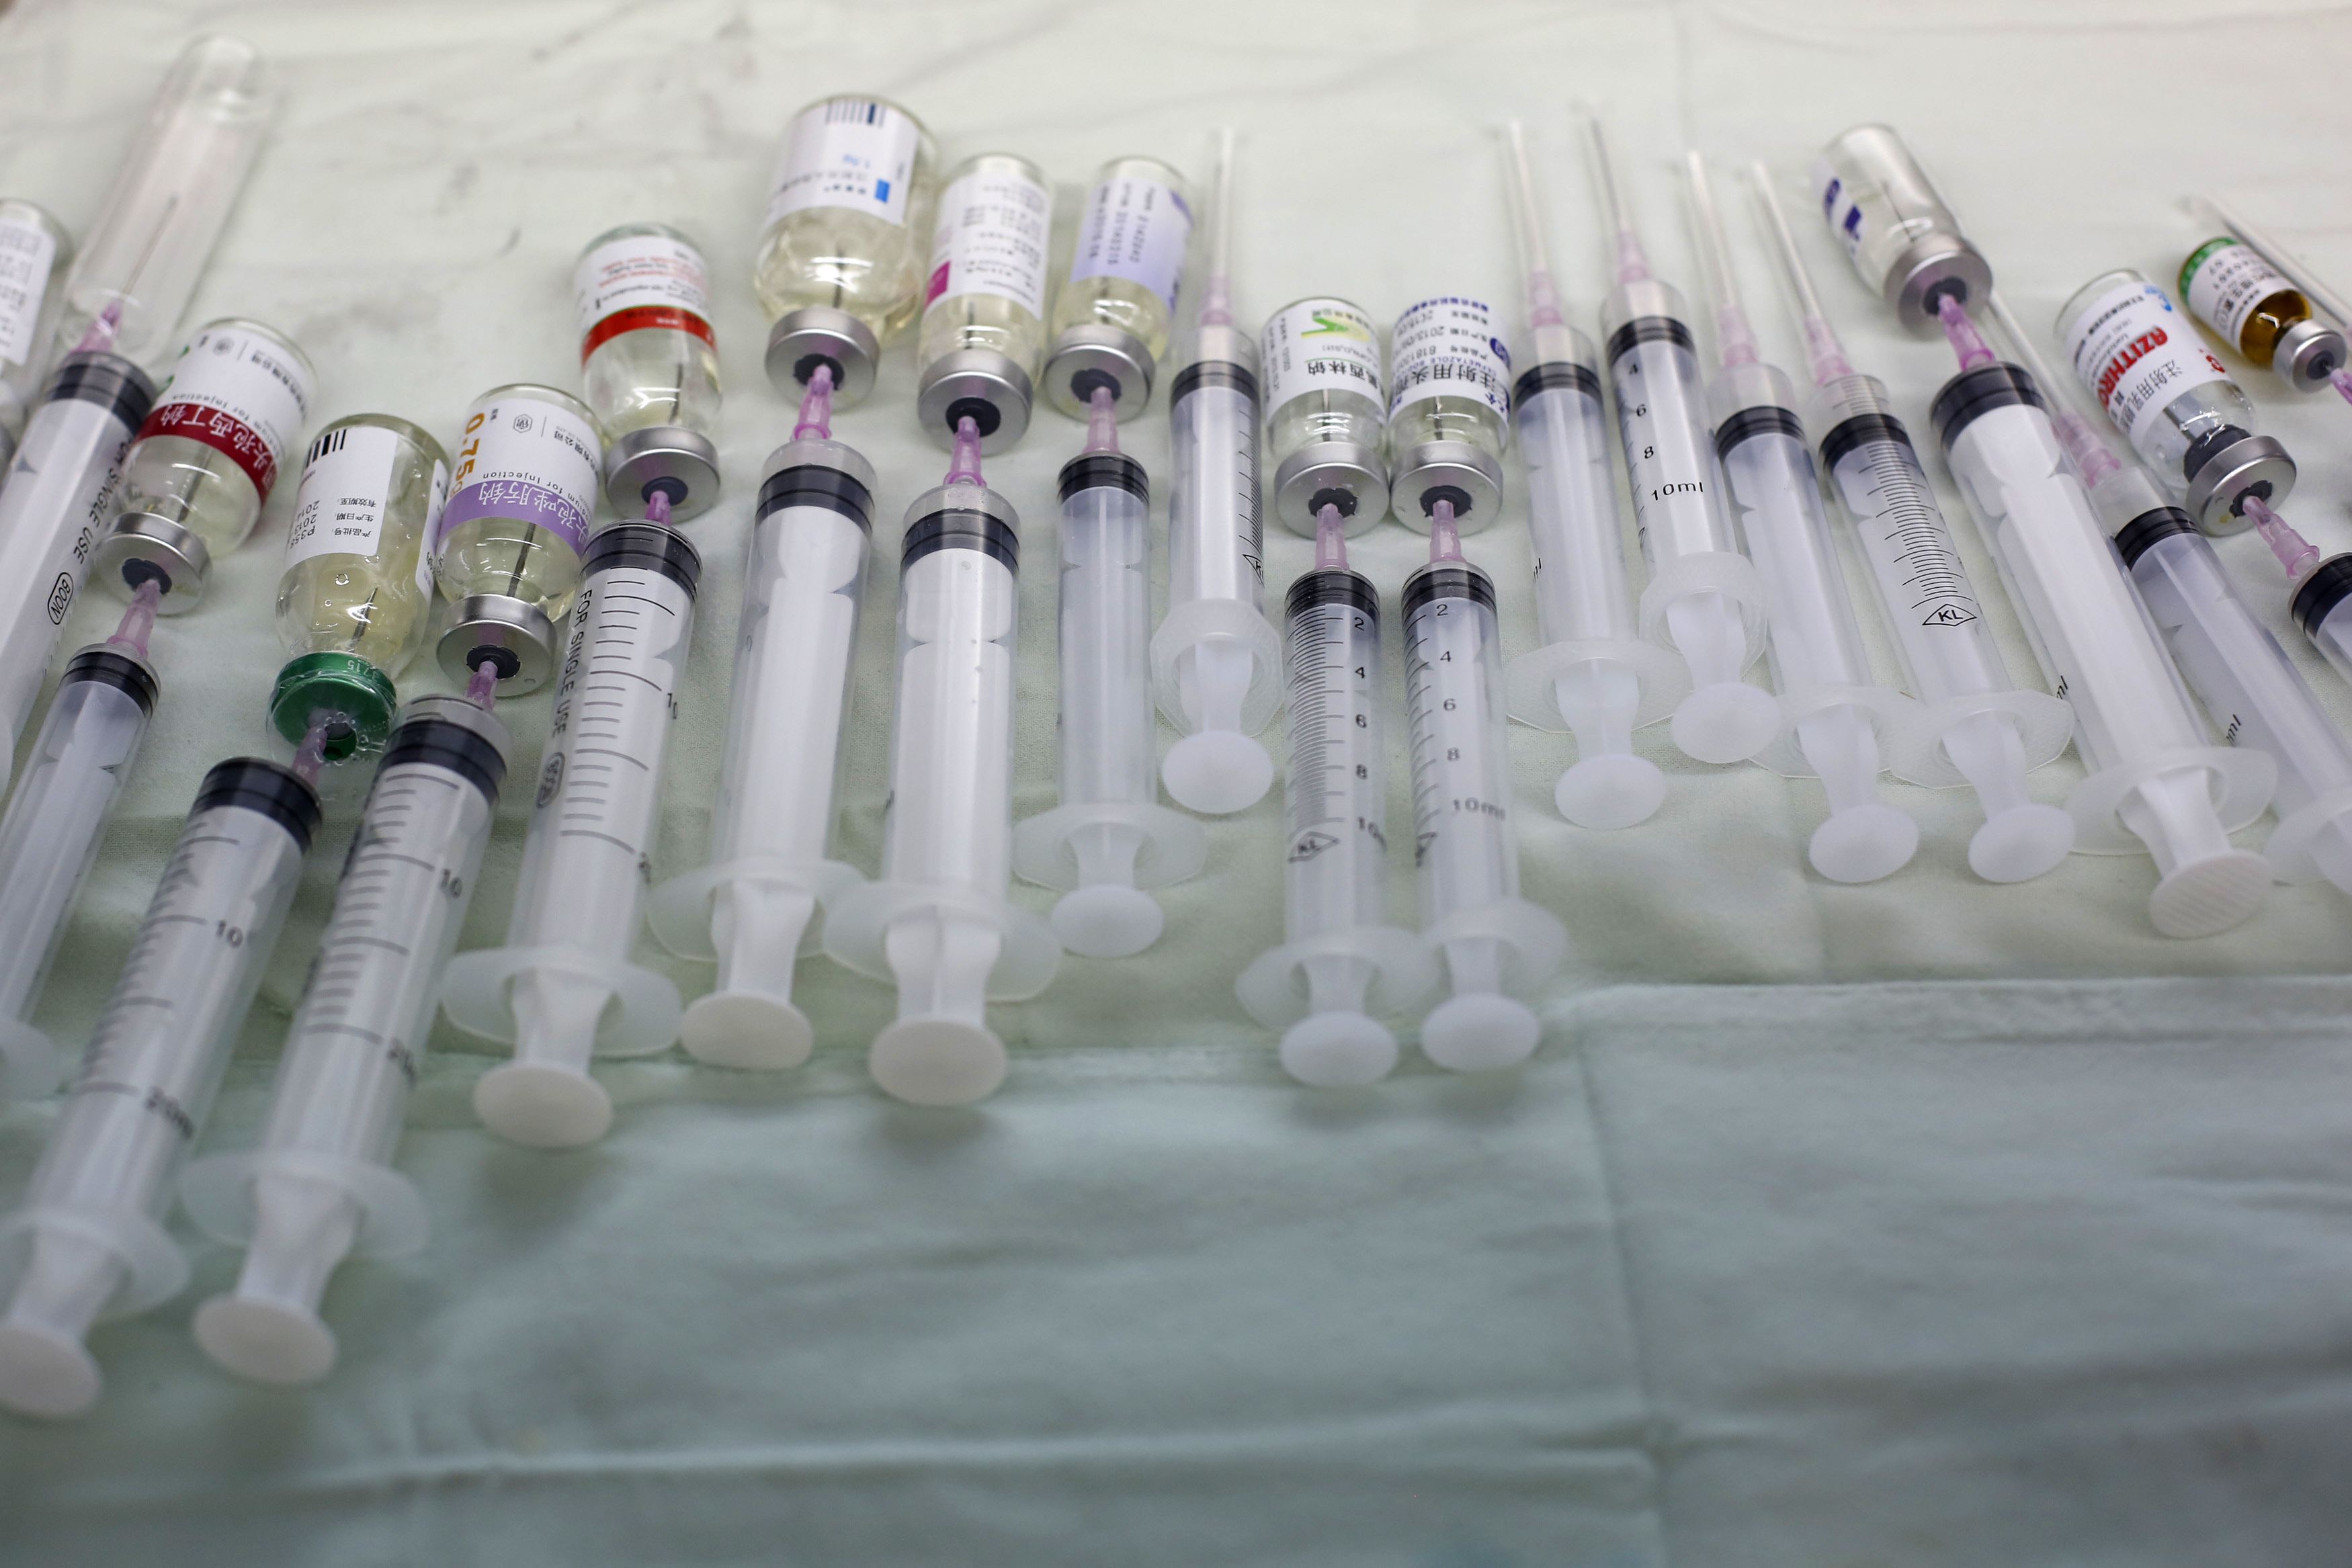 Injectable drugs are pictured inside an injection room at a hospital in Shanghai